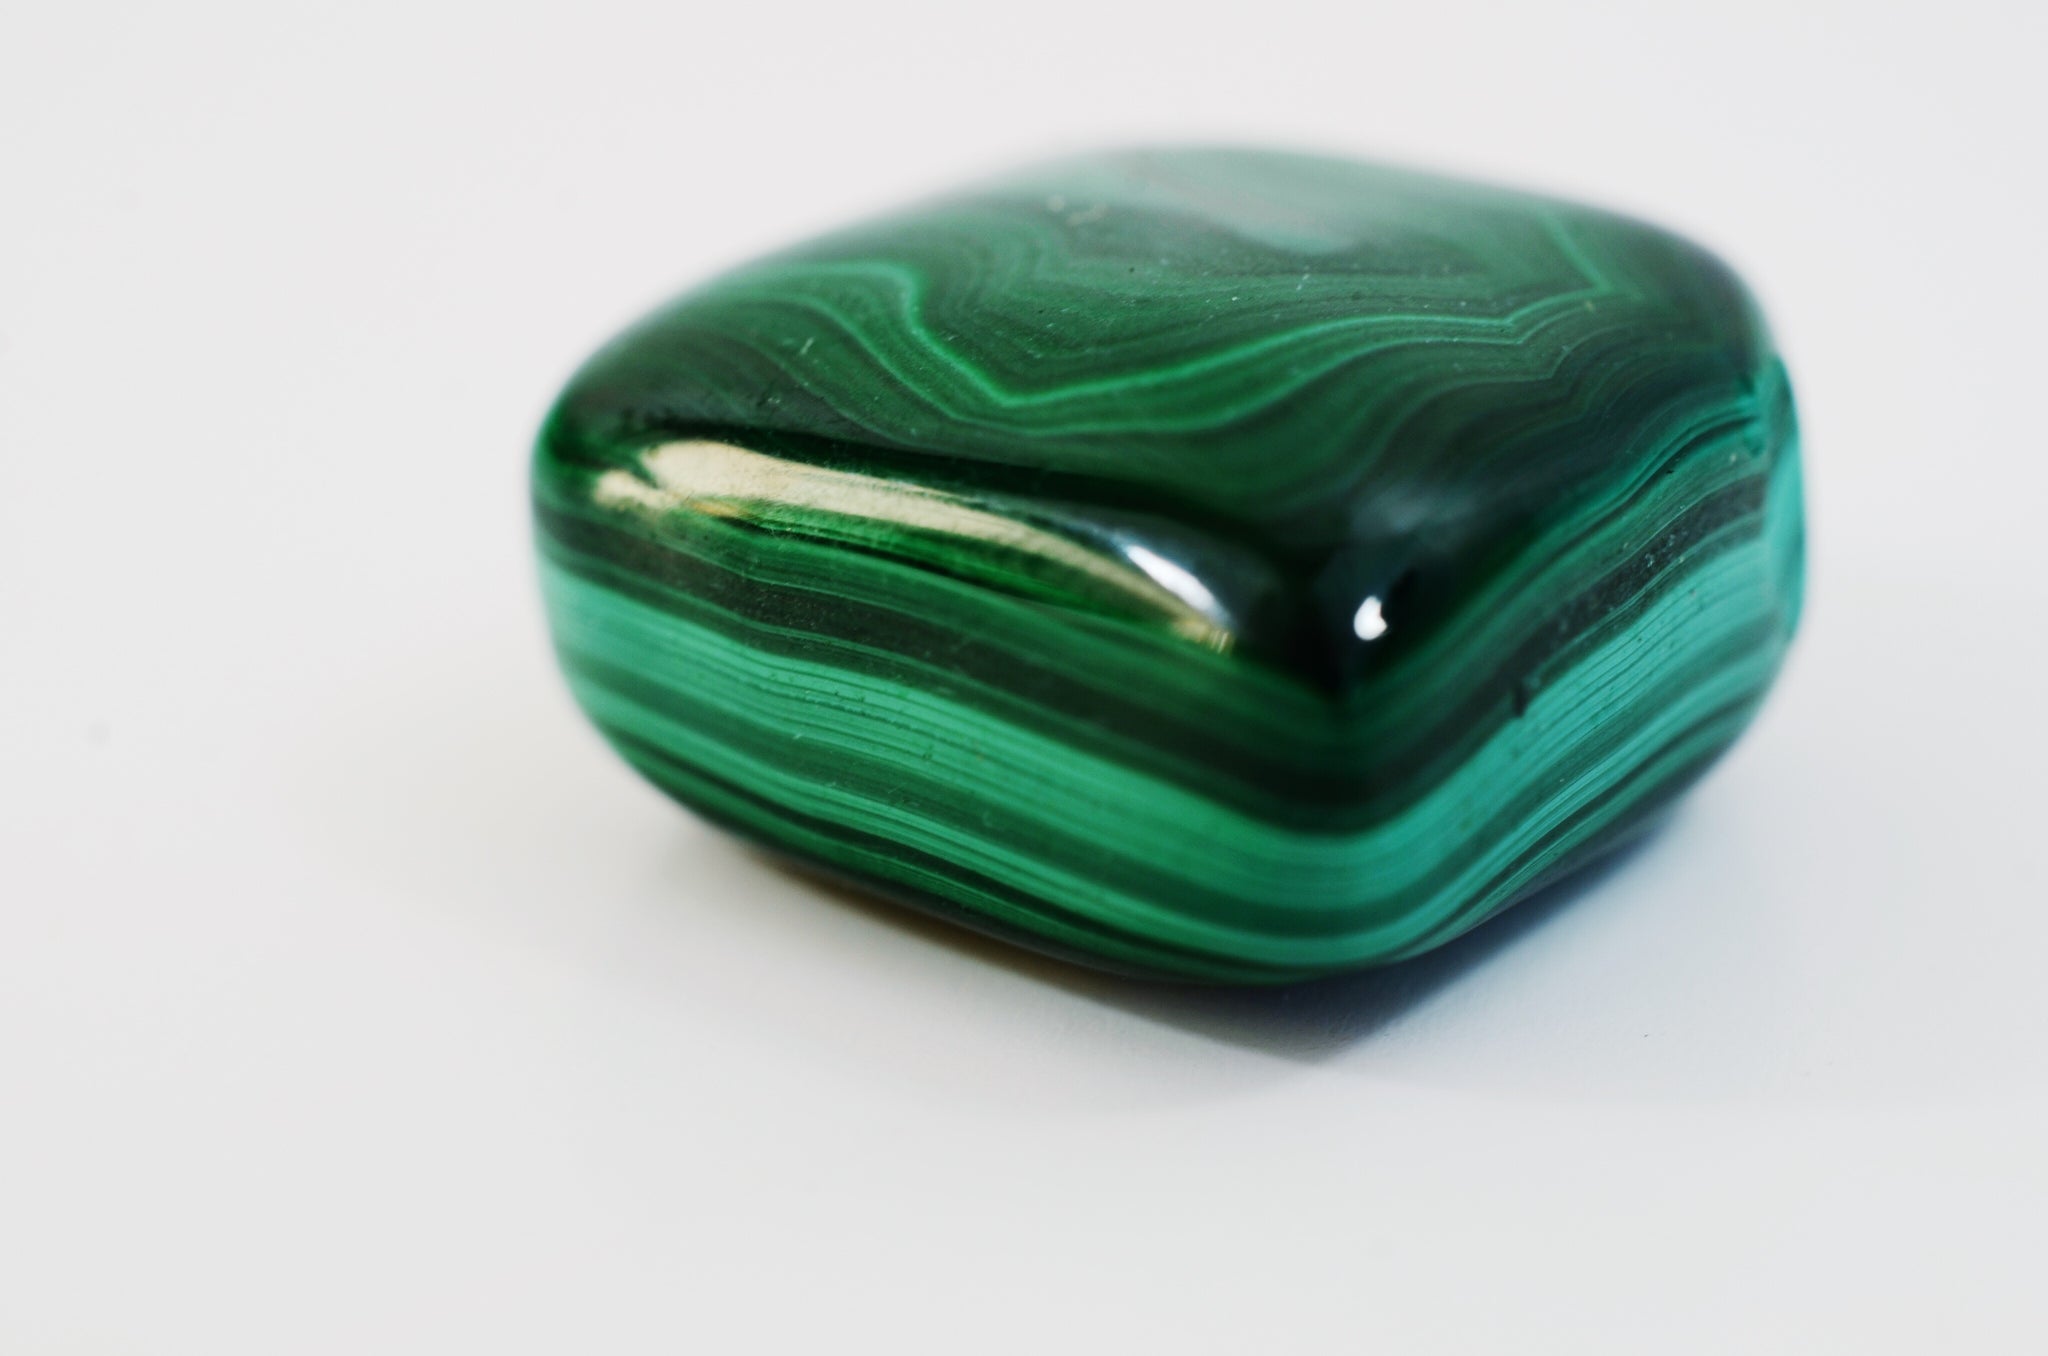 Malachite helps you make your own luck this St. Patrick's Day